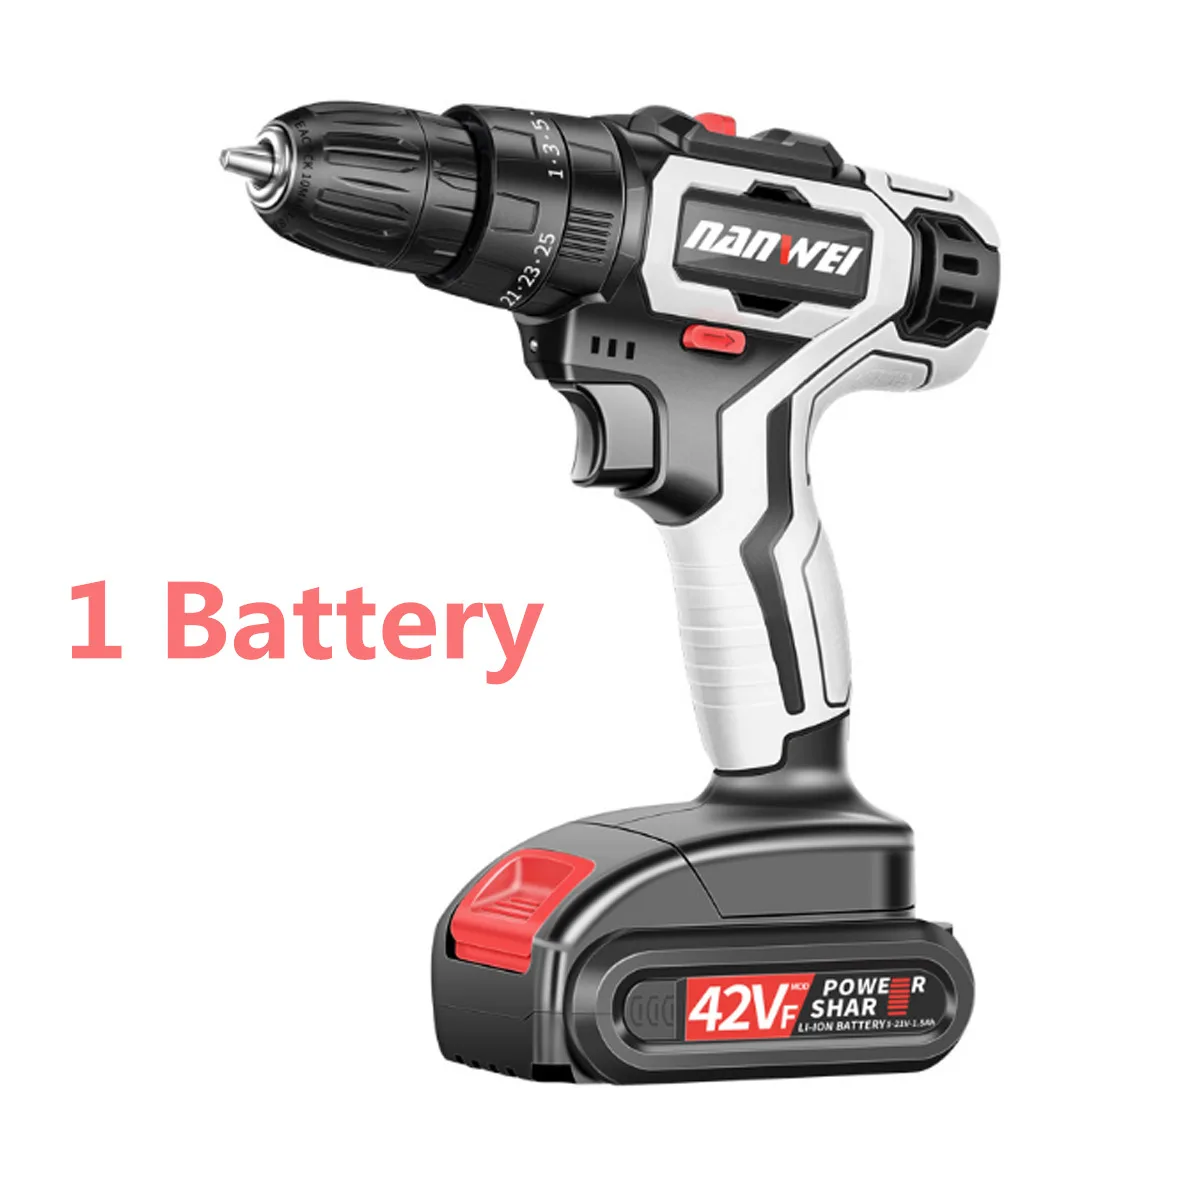 42VF Electric Drill 2 Speed 36NM Power Drills Cordless Screwdriver Lithium Battery Mini Drill Cordless Screwdriver Power Tools - Color: 1 battery